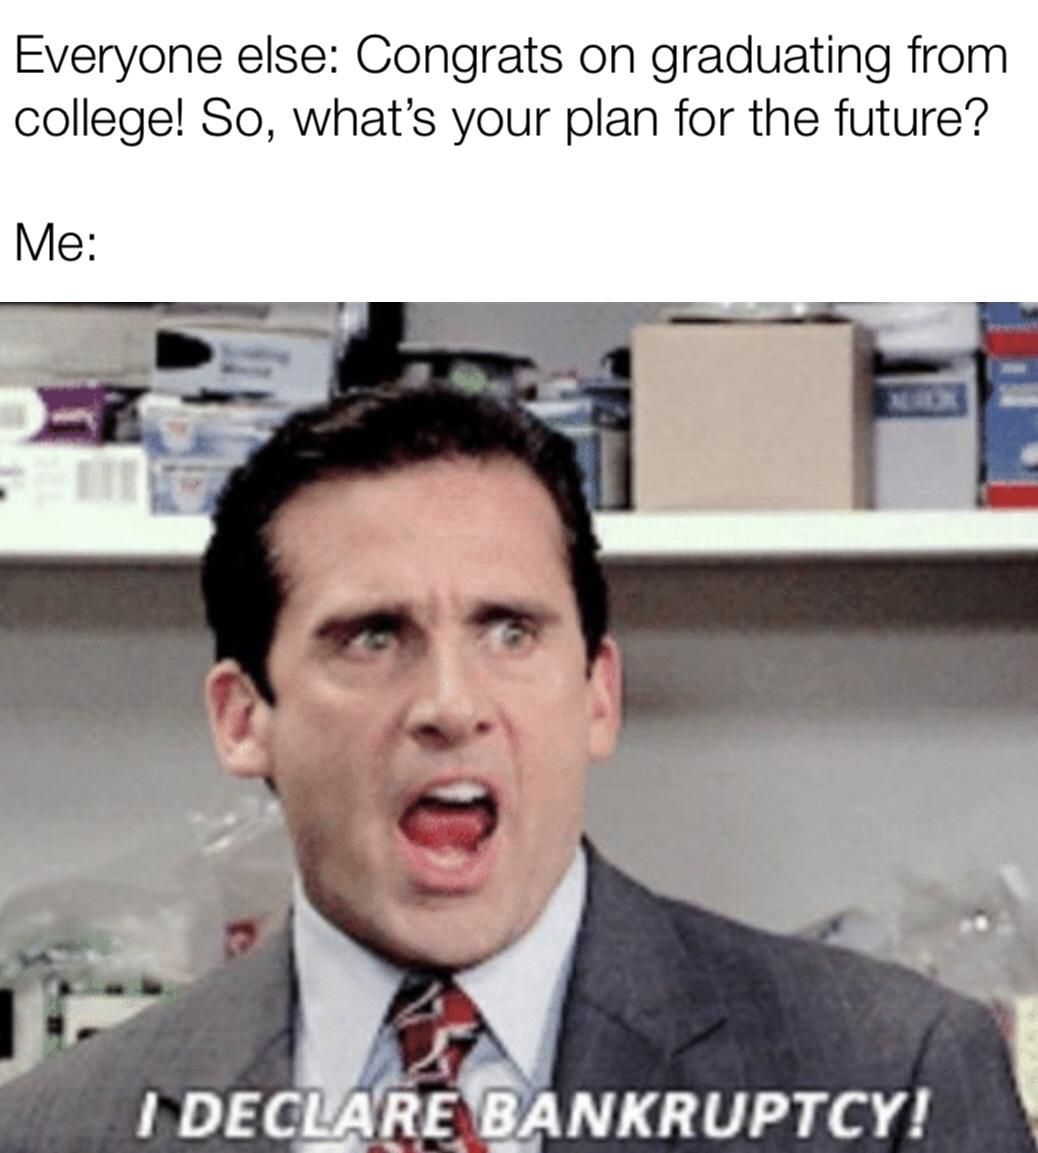 20 Student Loan Memes That Are Hilarious Yet Tragic